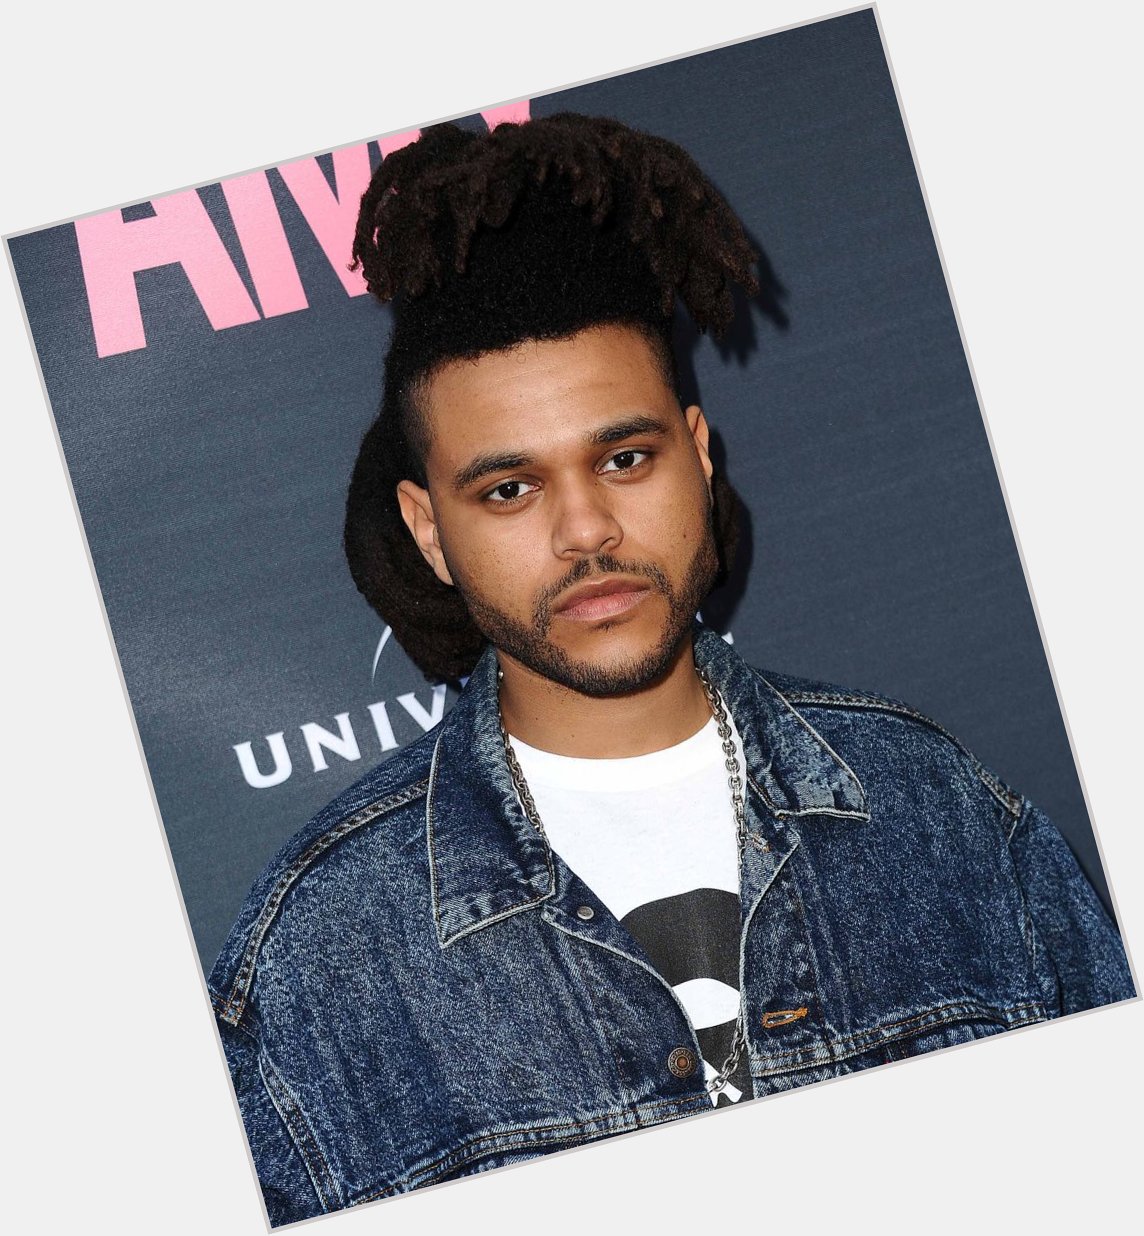 Happy 30th Birthday to singer, songwriter, actor and record producer, The Weeknd! 